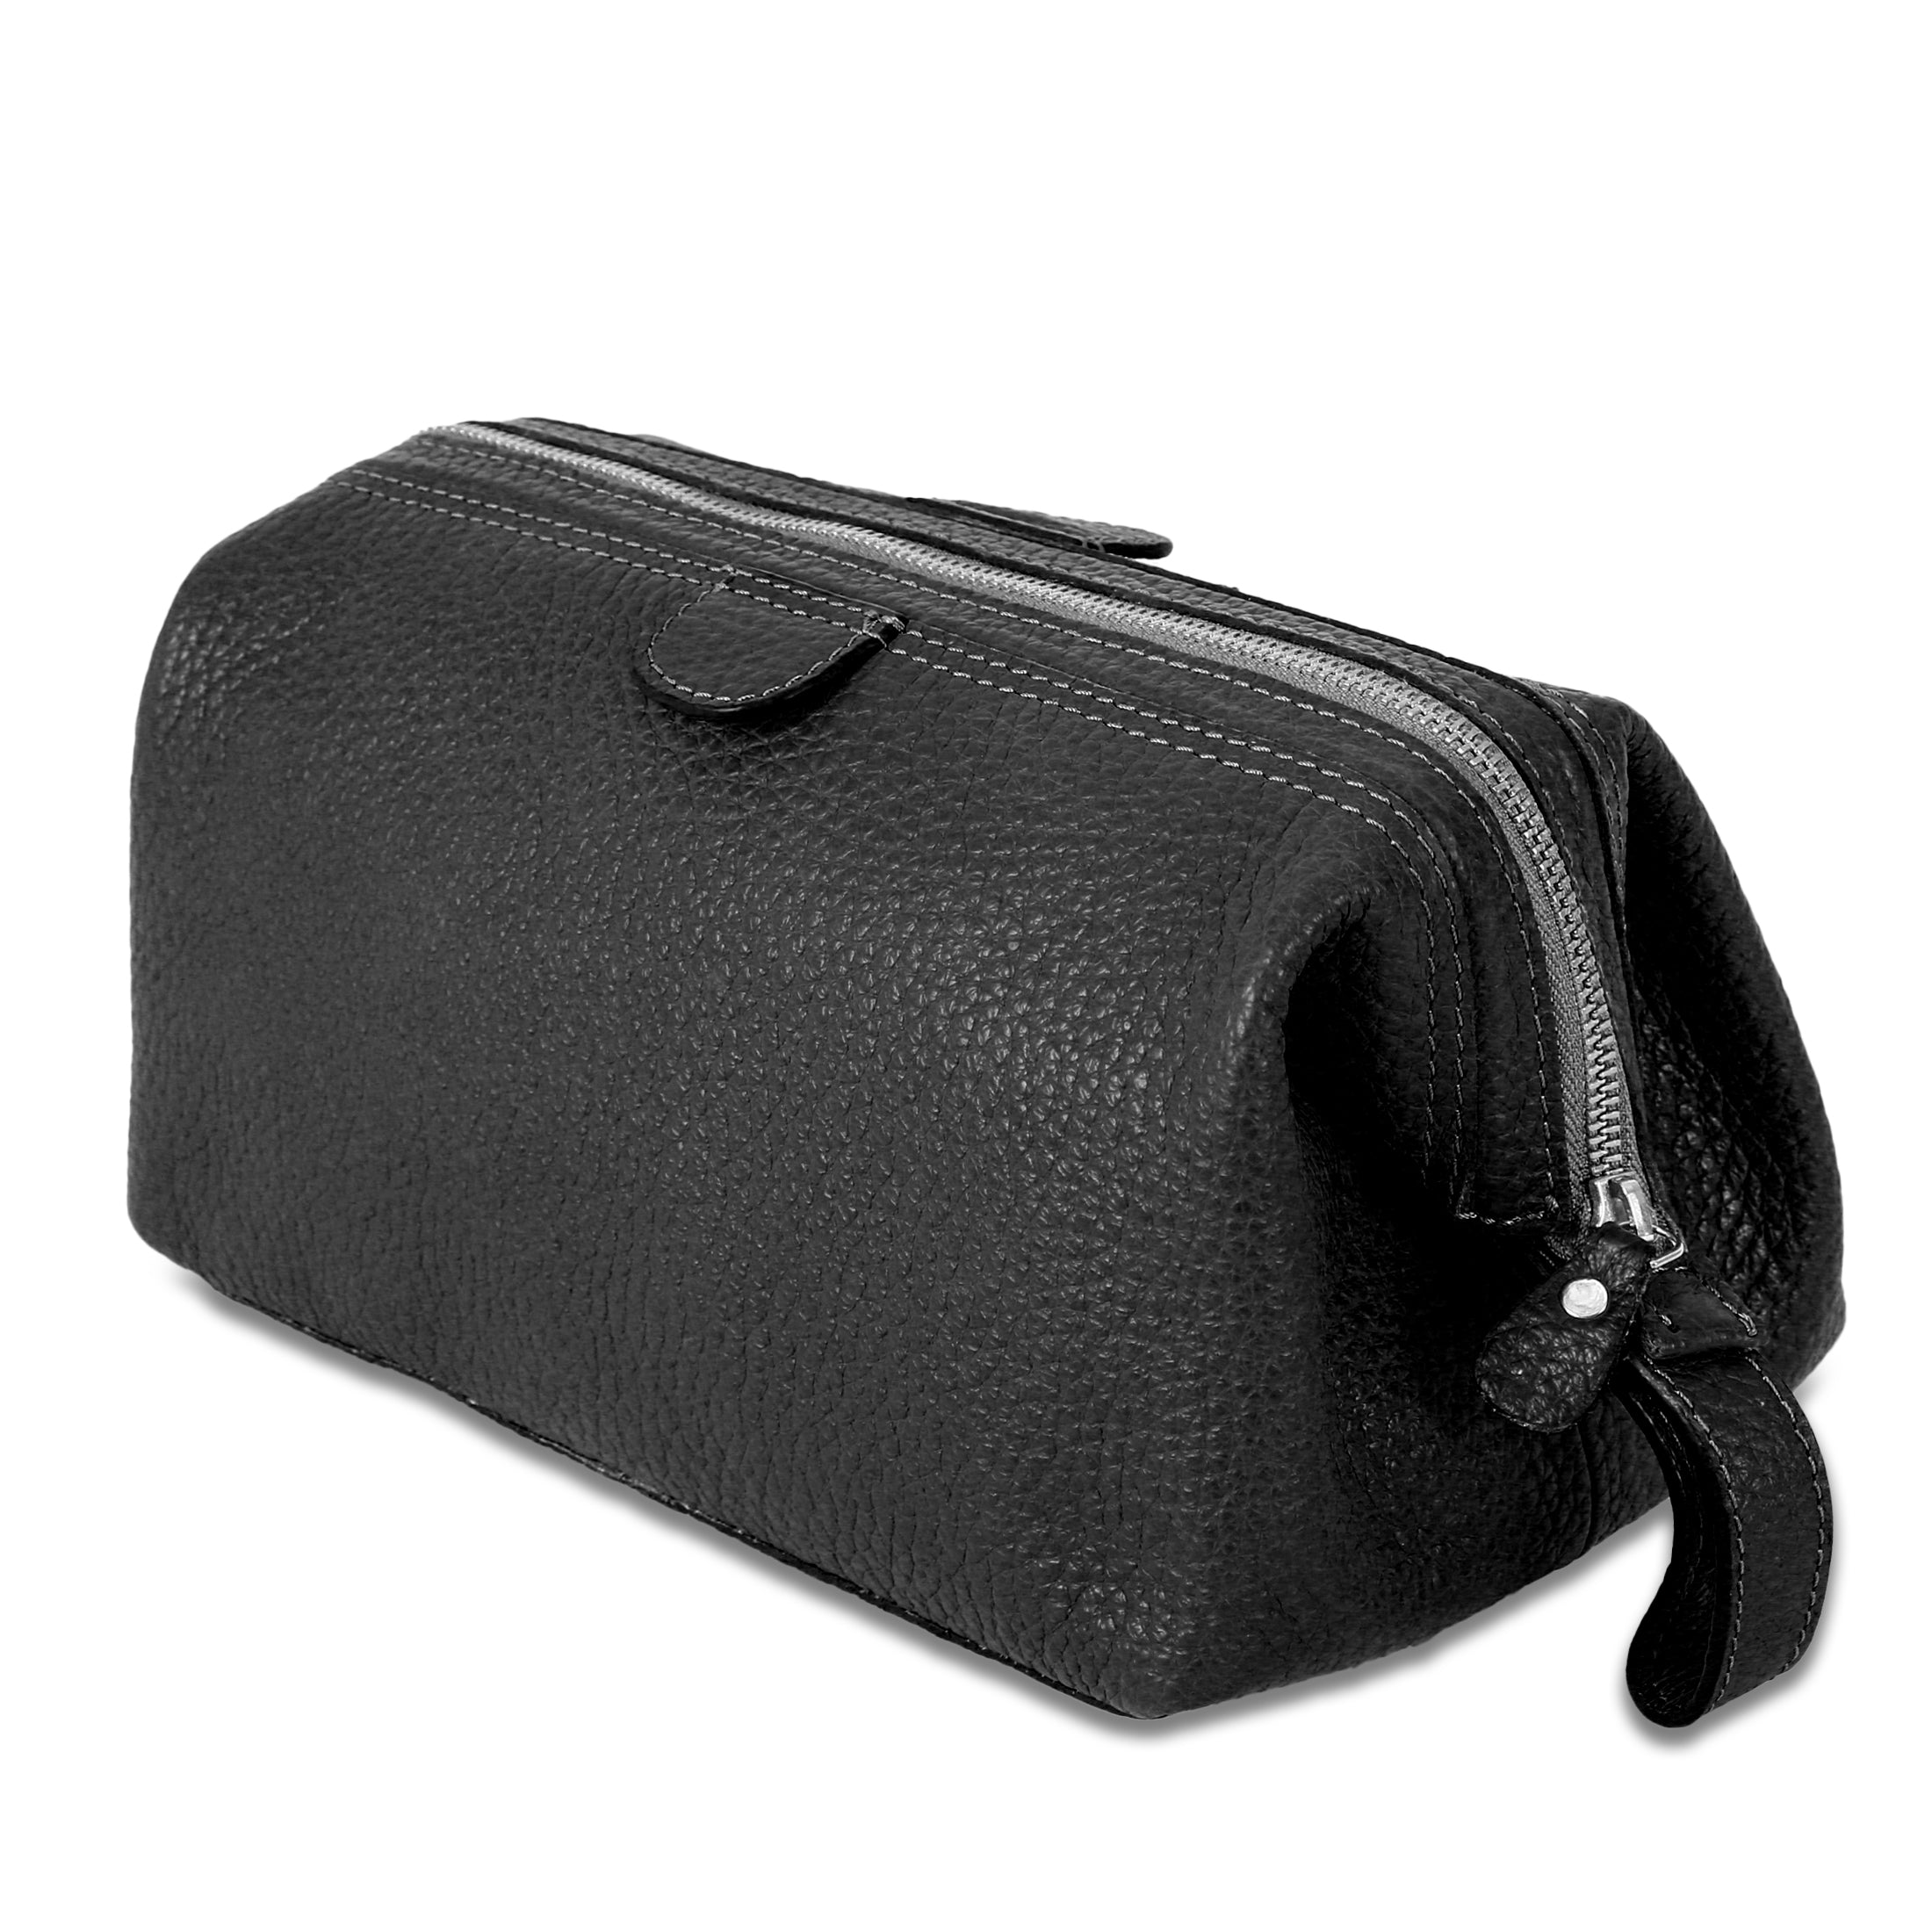 Leather Toiletry Bag, Leather Wash Bag, Men Cosmetic Bag, Women